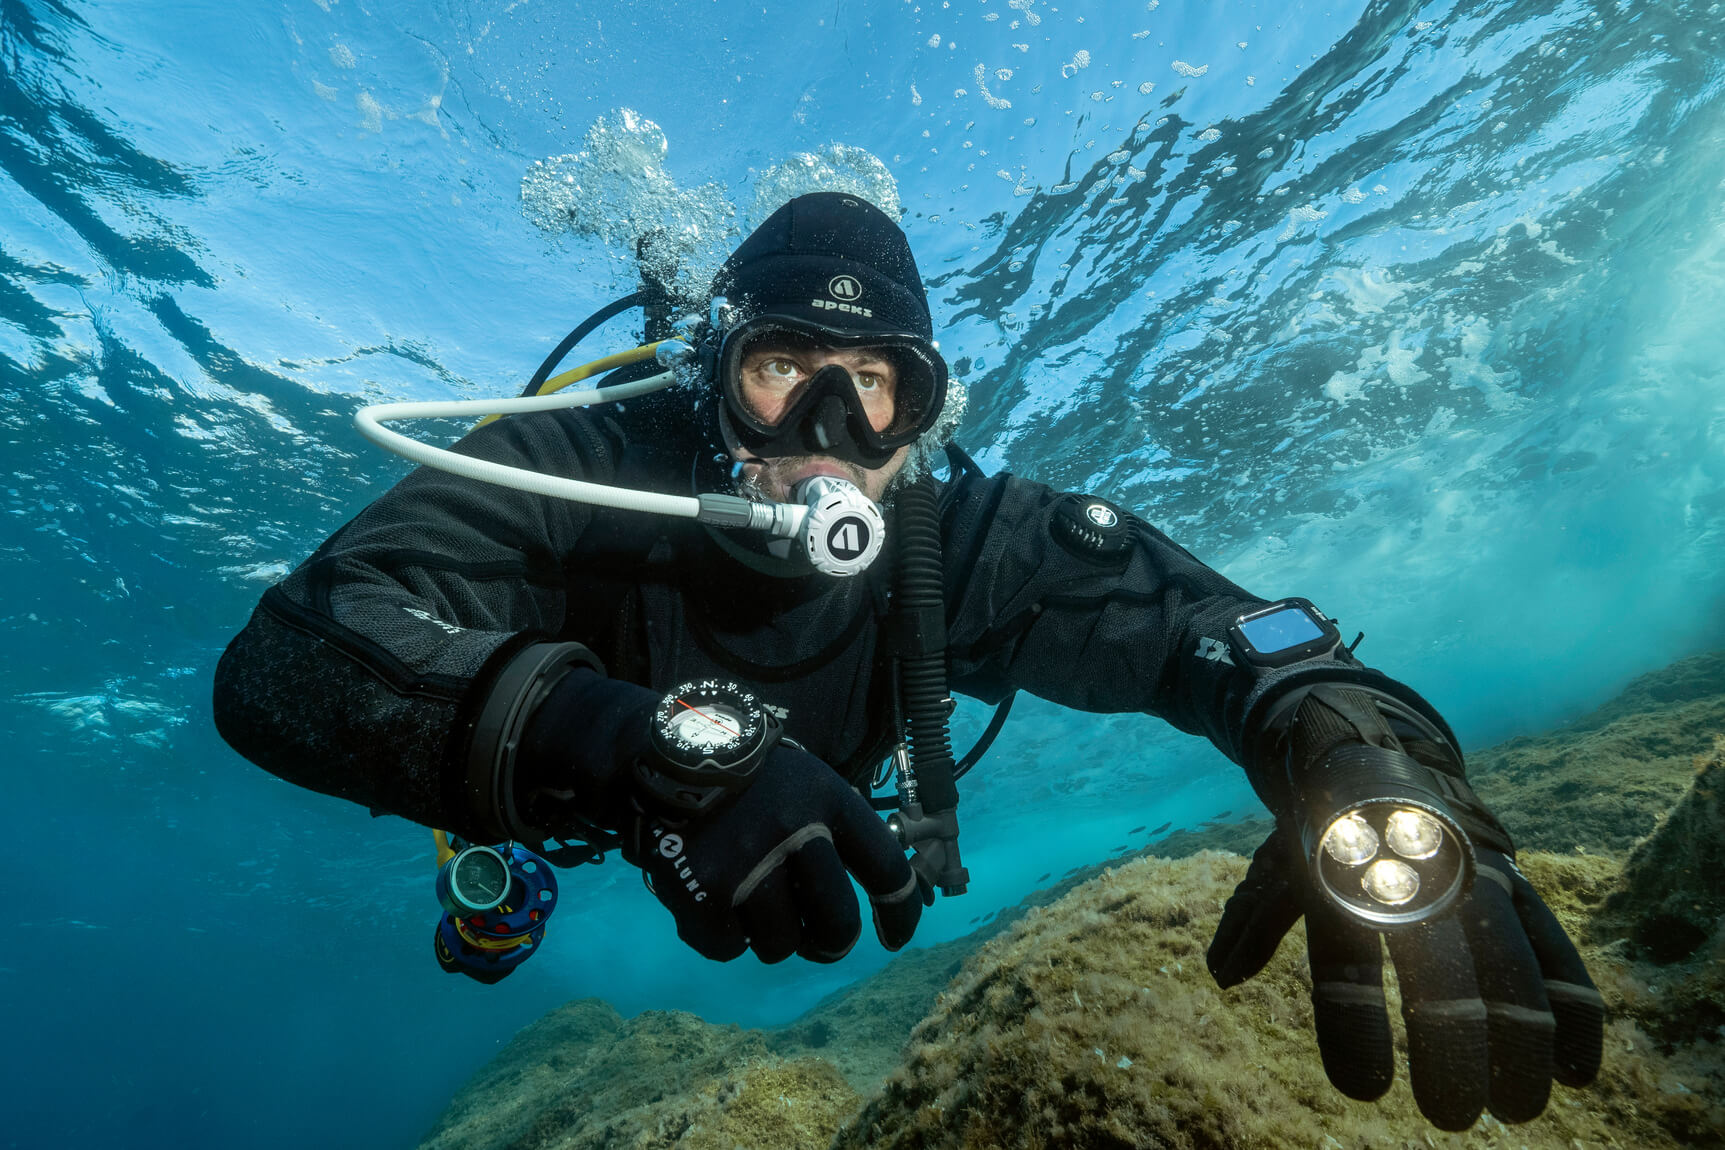 diver diving underwater in a drysuit